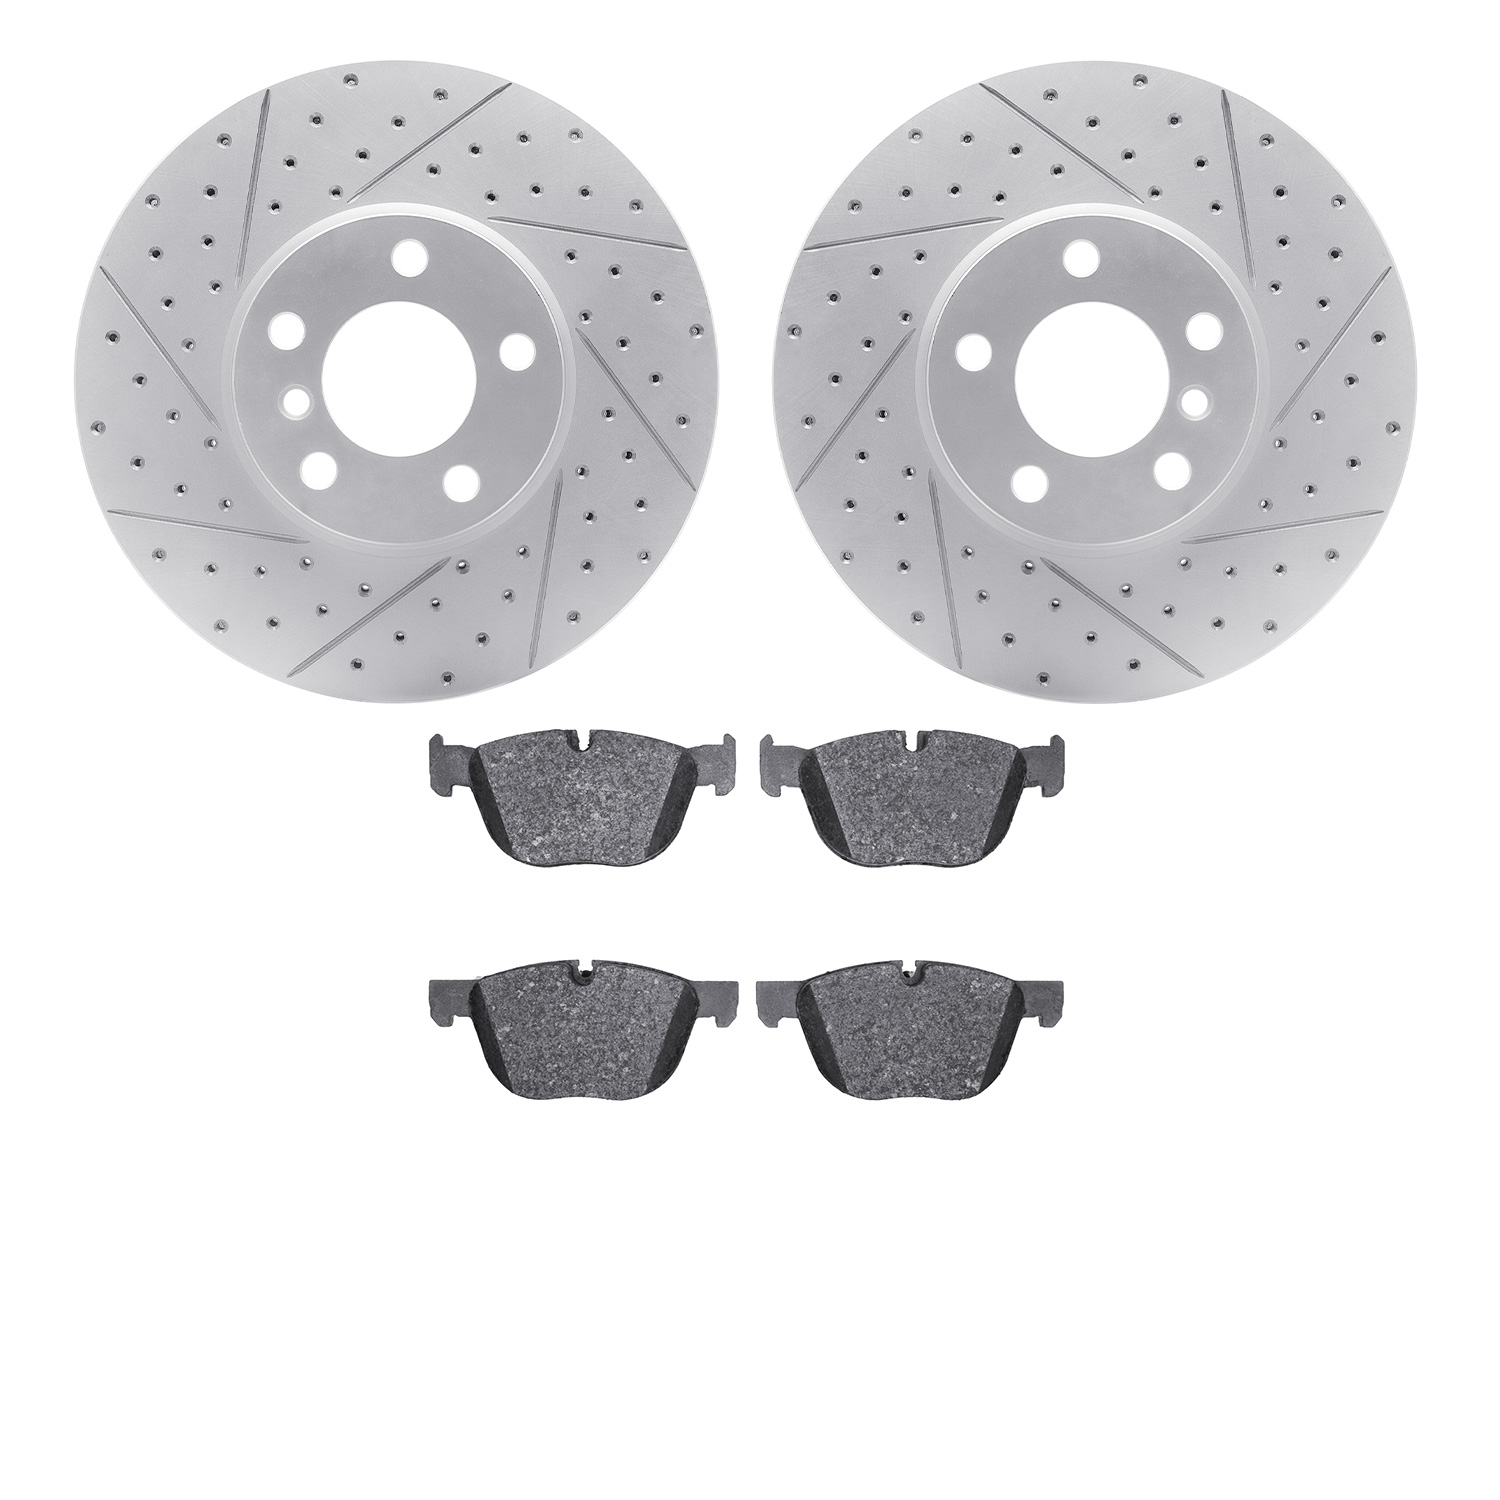 2502-31123 Geoperformance Drilled/Slotted Rotors w/5000 Advanced Brake Pads Kit, 2007-2014 BMW, Position: Front